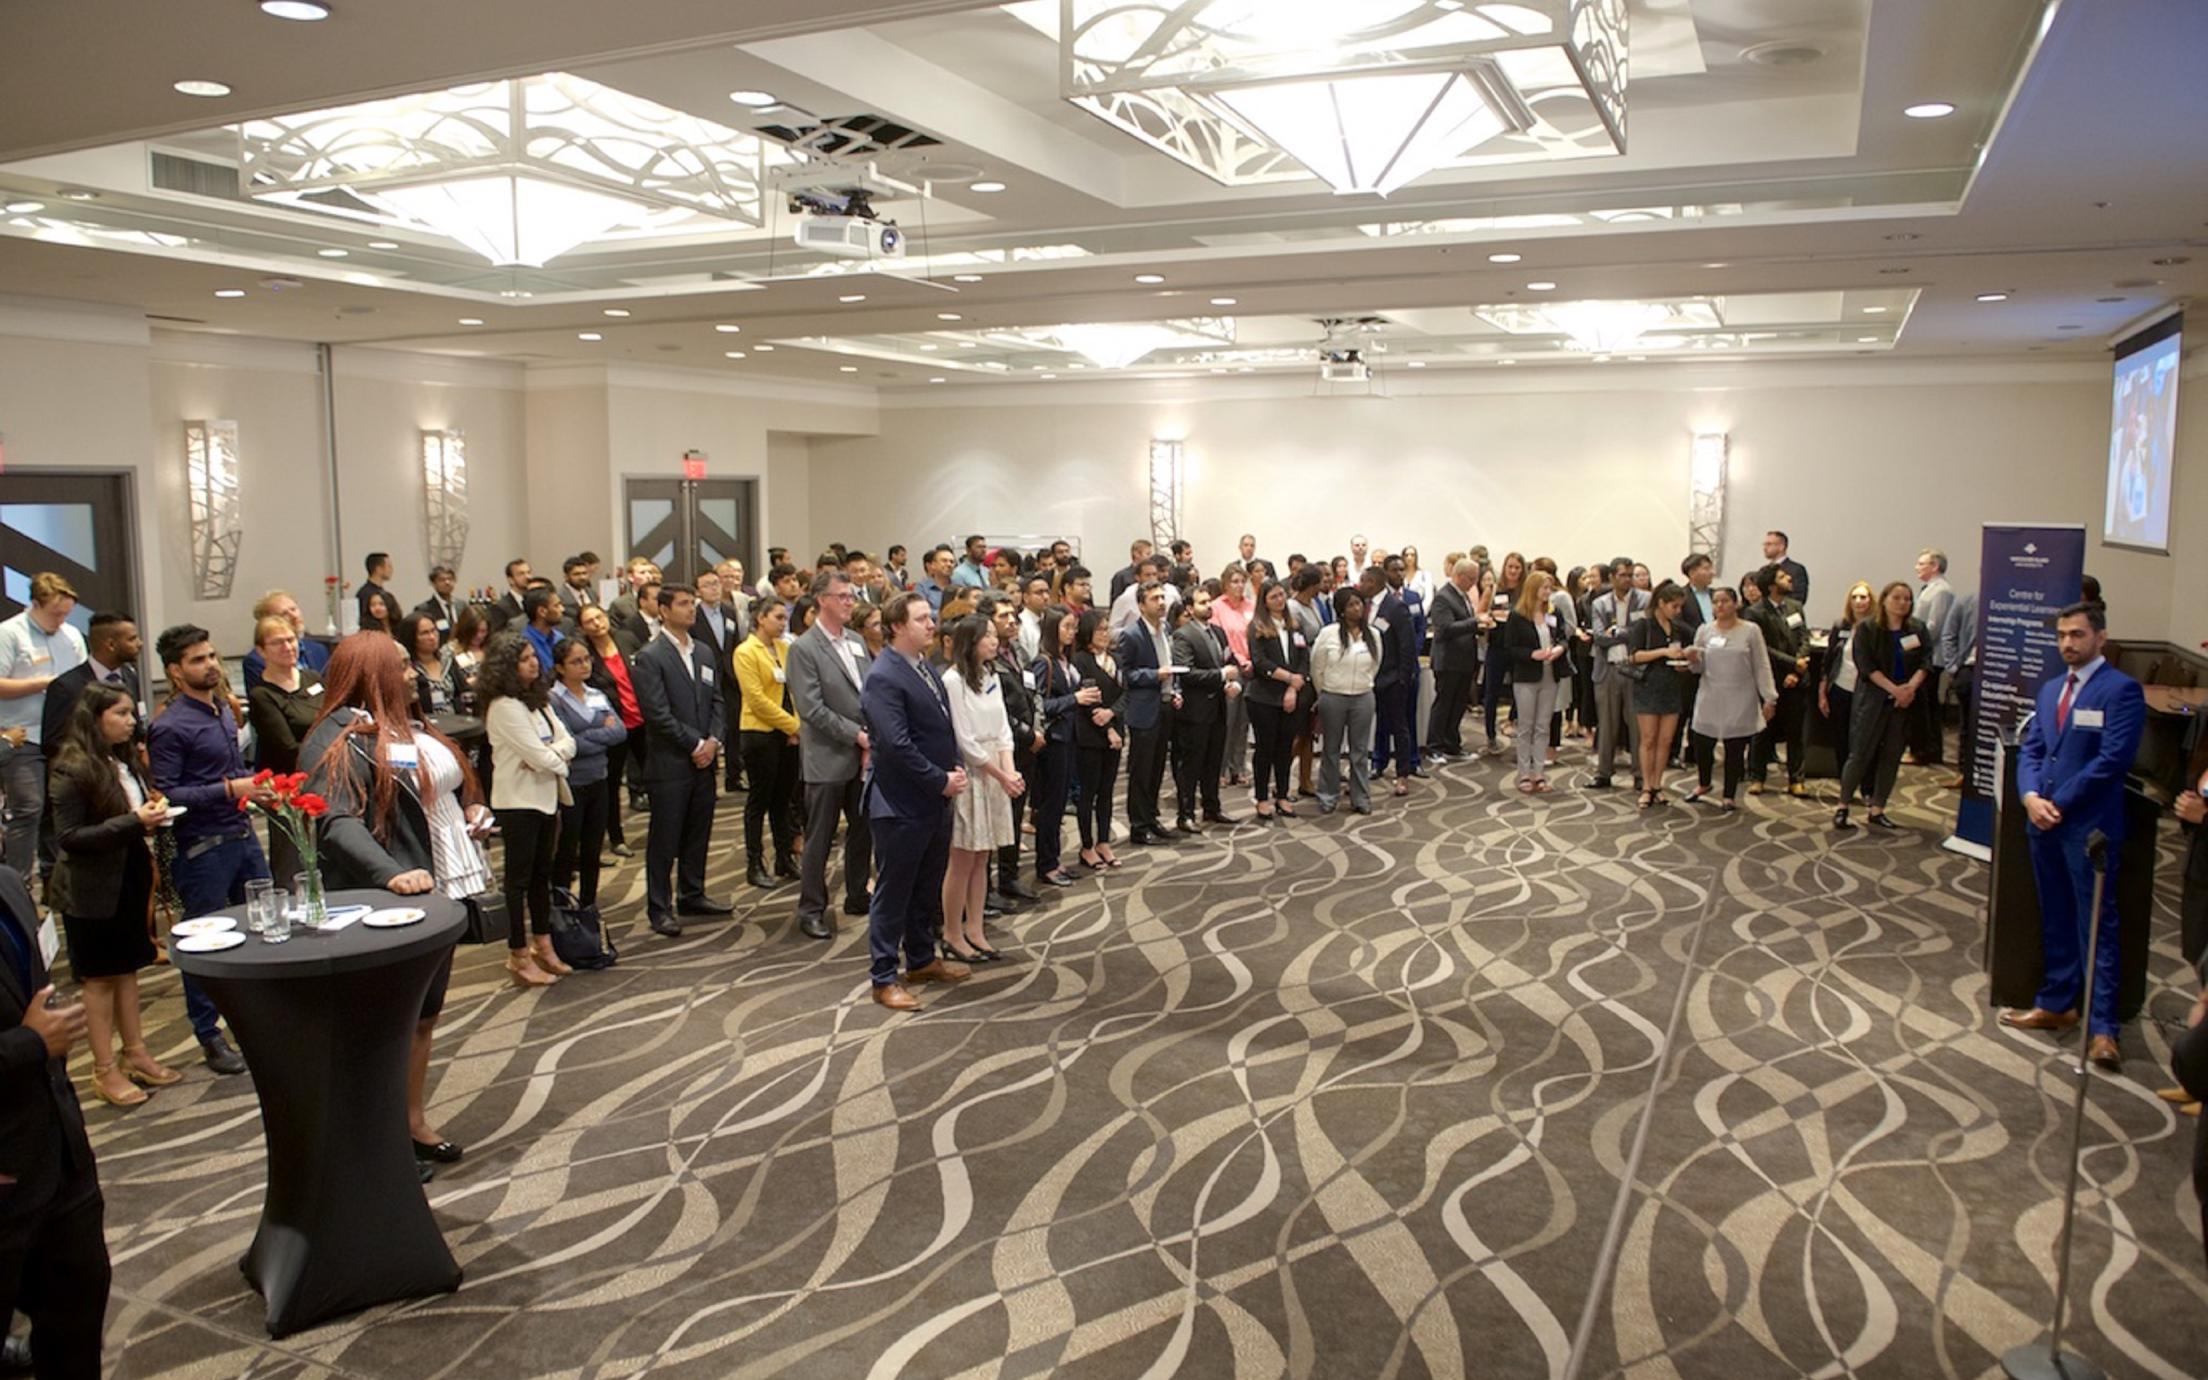 Attendees at the 2019 Business Mixer at the Coast Bastion Hotel